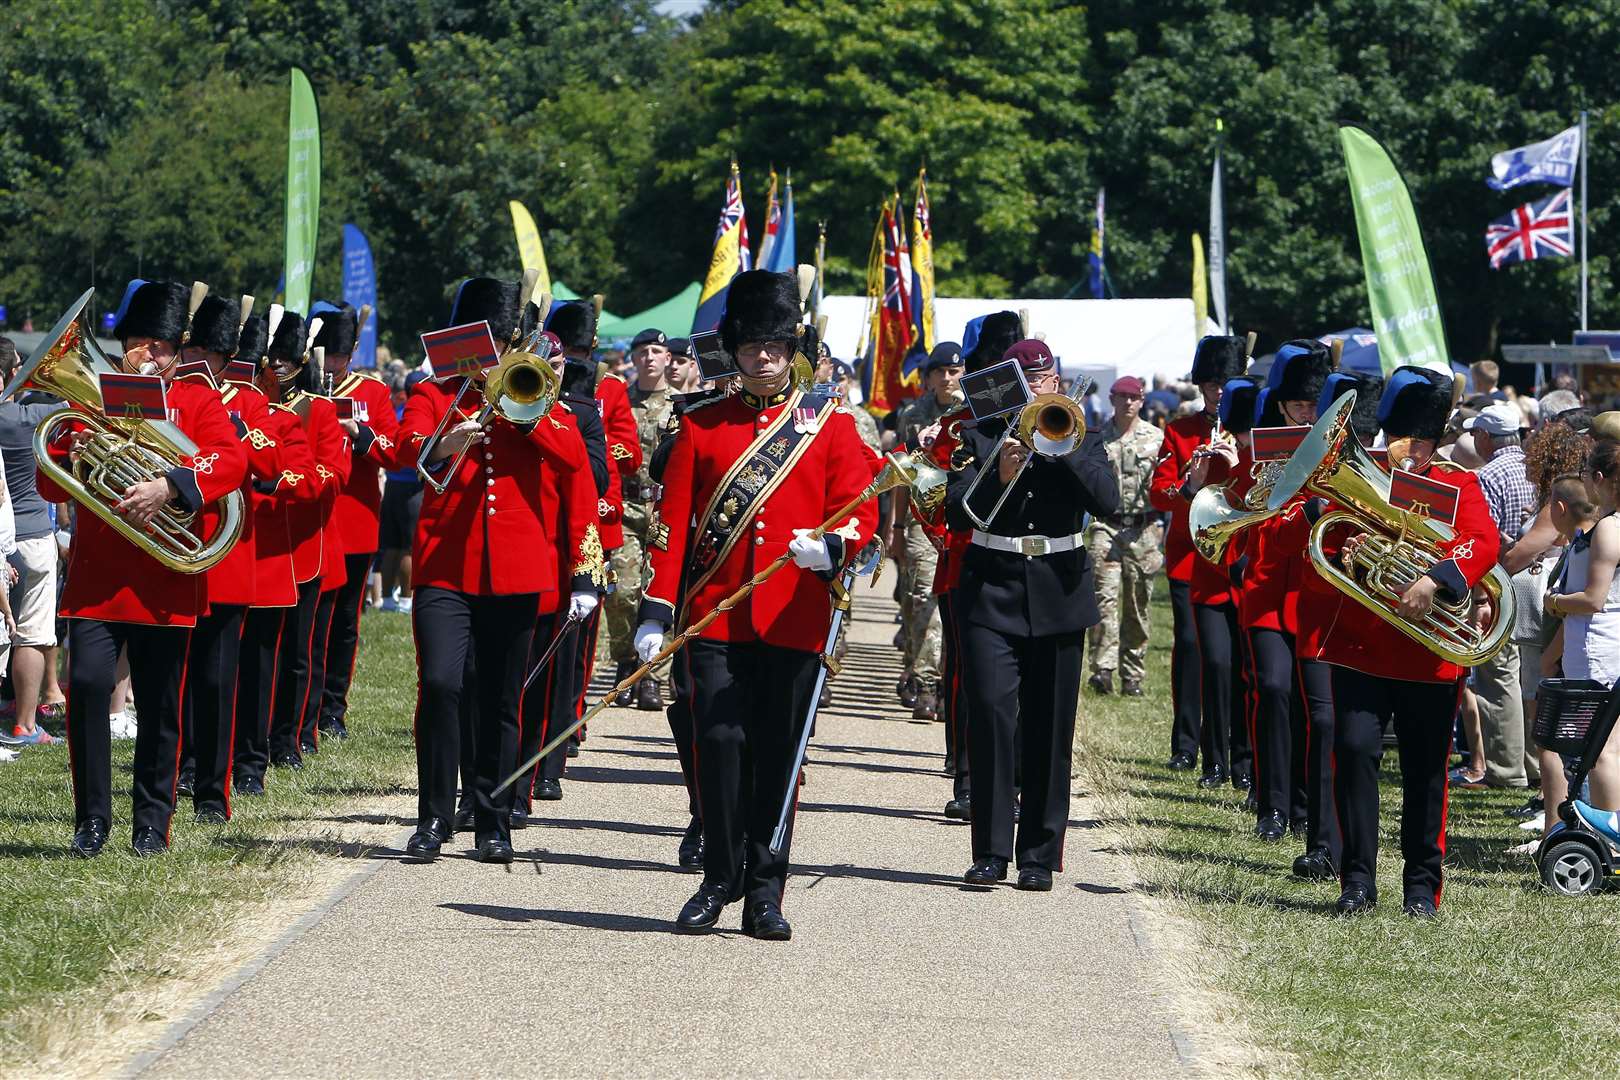 Medway's event in 2018